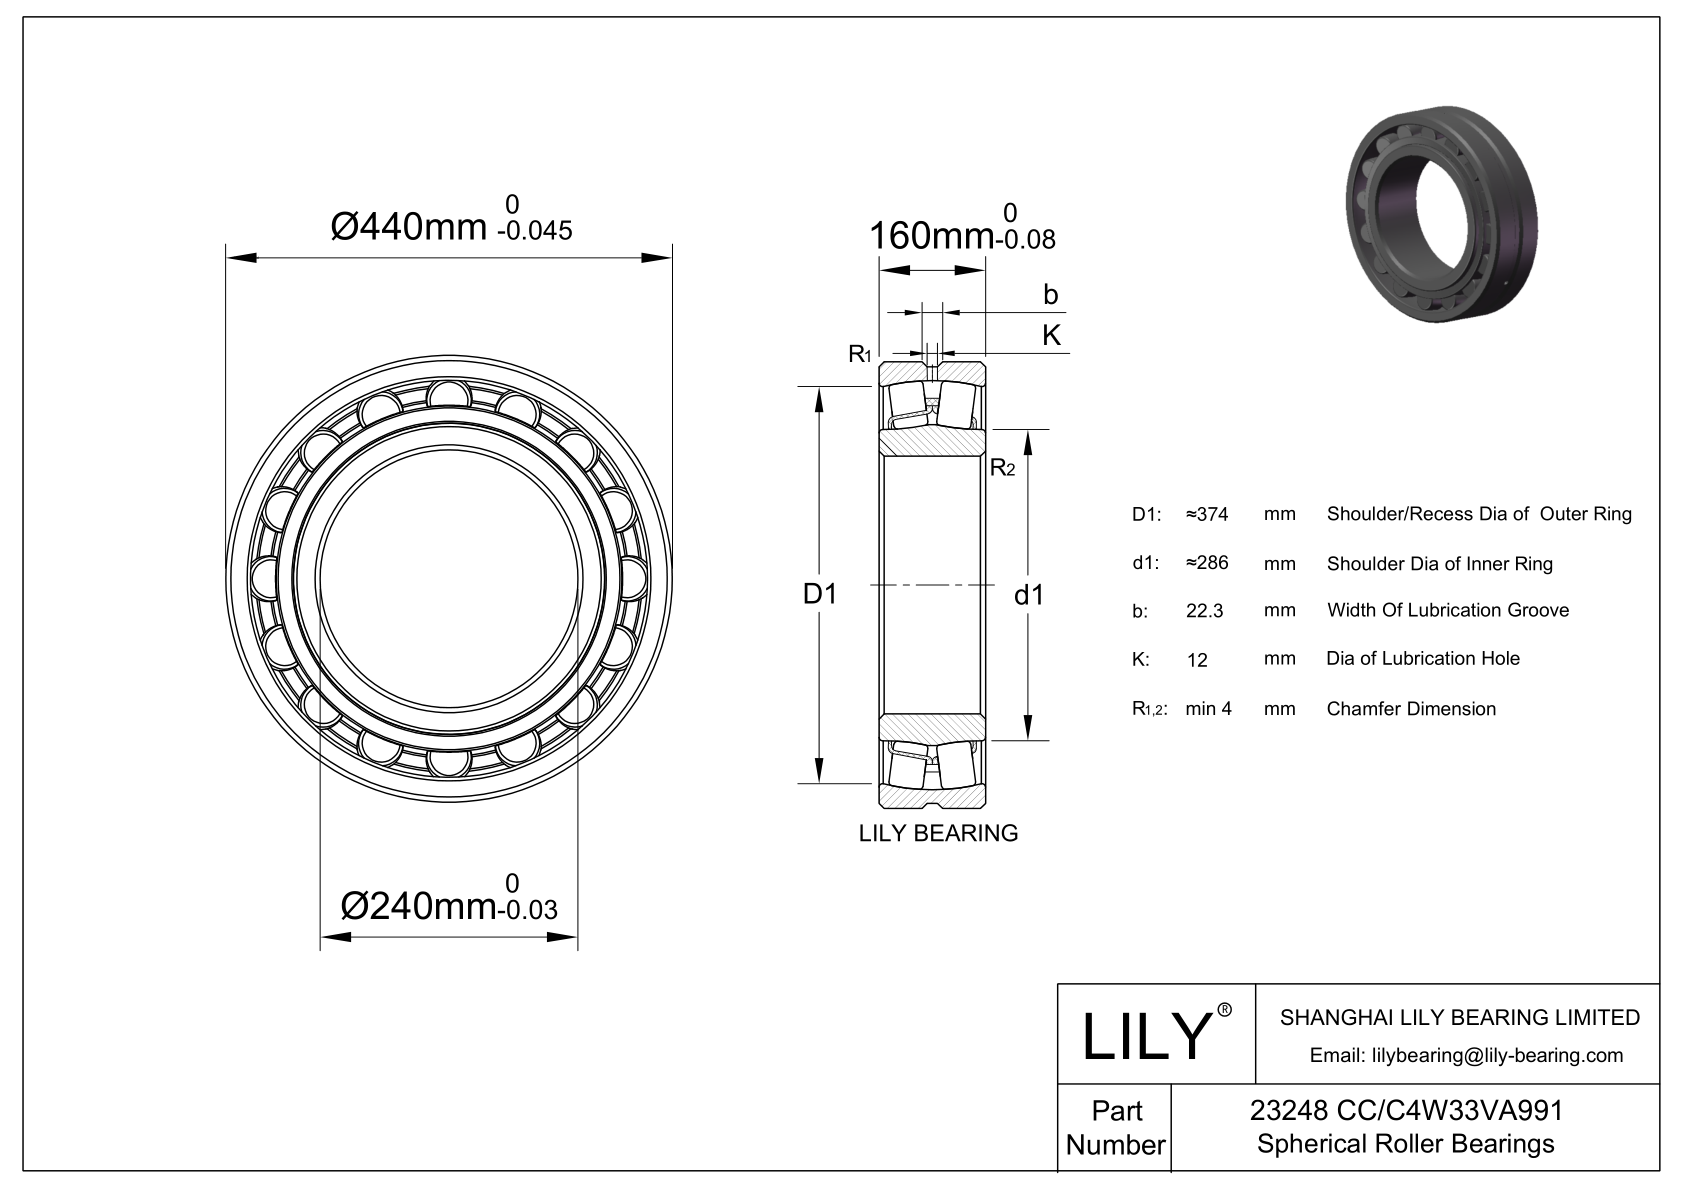 23248 CC/C4W33VA991 Double Row Spherical Roller Bearing cad drawing